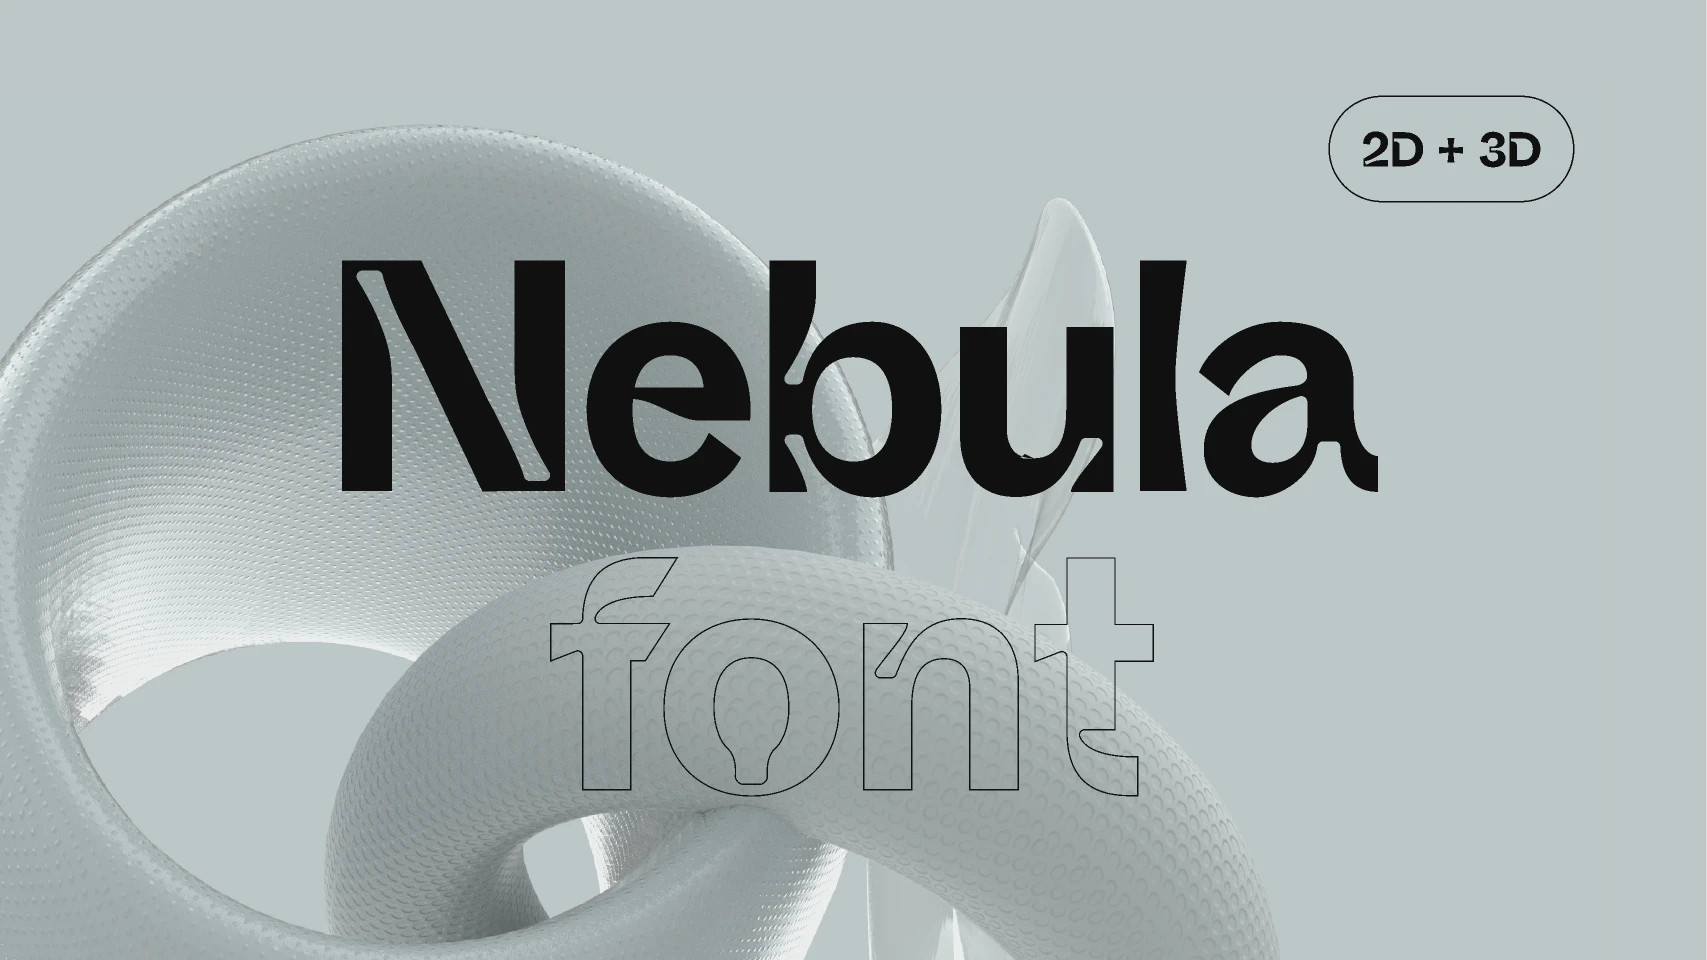 Nebula font by Airnauts for Figma and Adobe XD